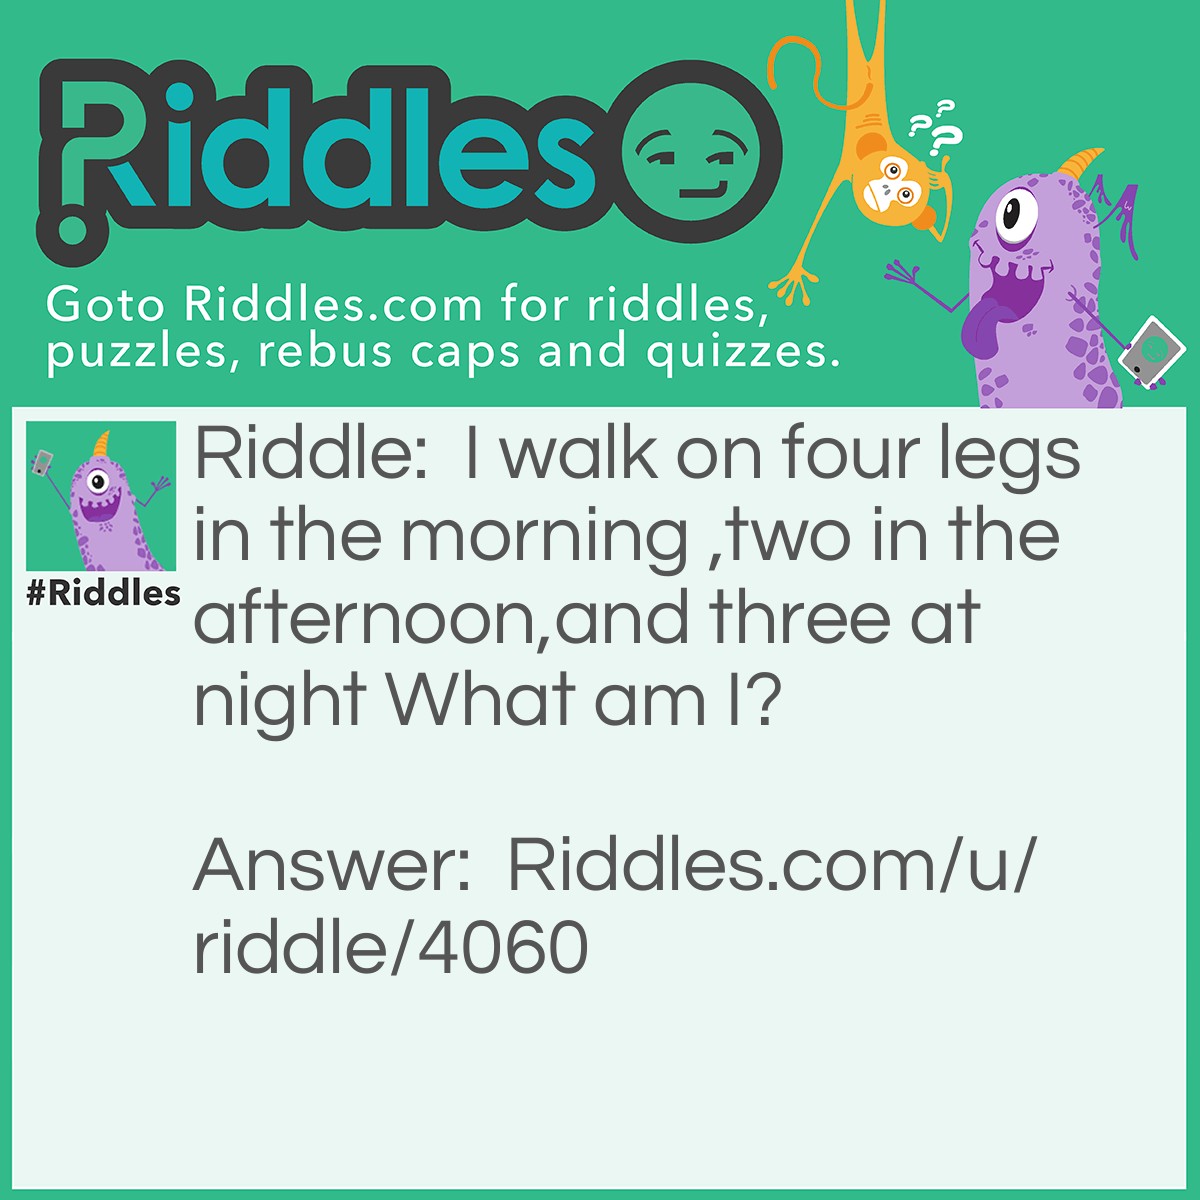 Riddle: I walk on four legs in the morning ,two in the afternoon,and three at night What am I? Answer: A man.